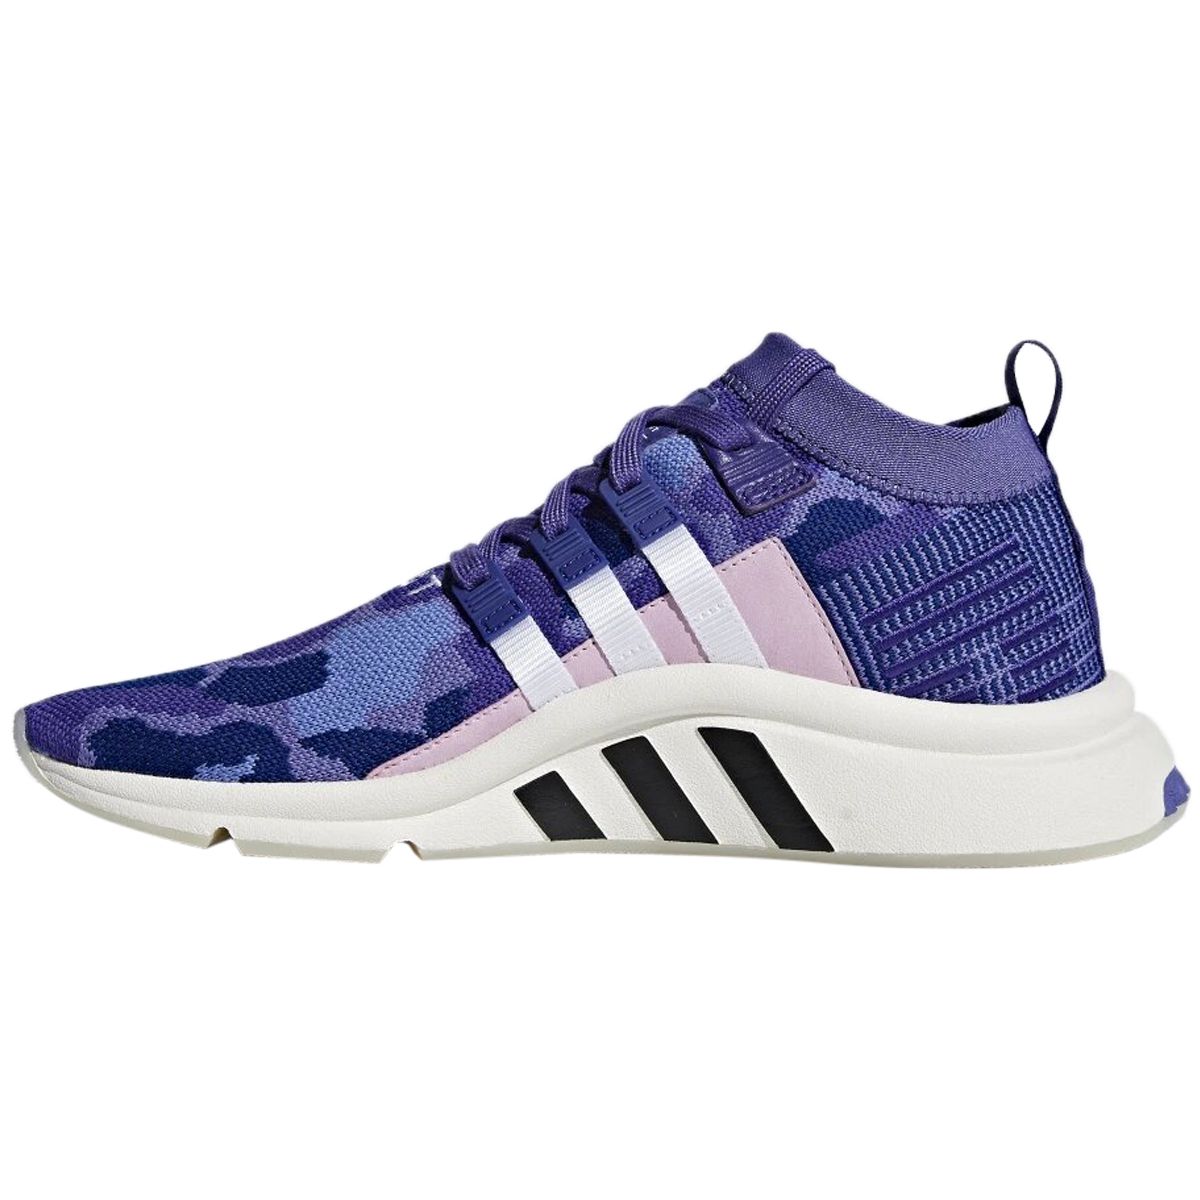 Adidas Eqt Support Mid Adv Pk Mens Style 7457